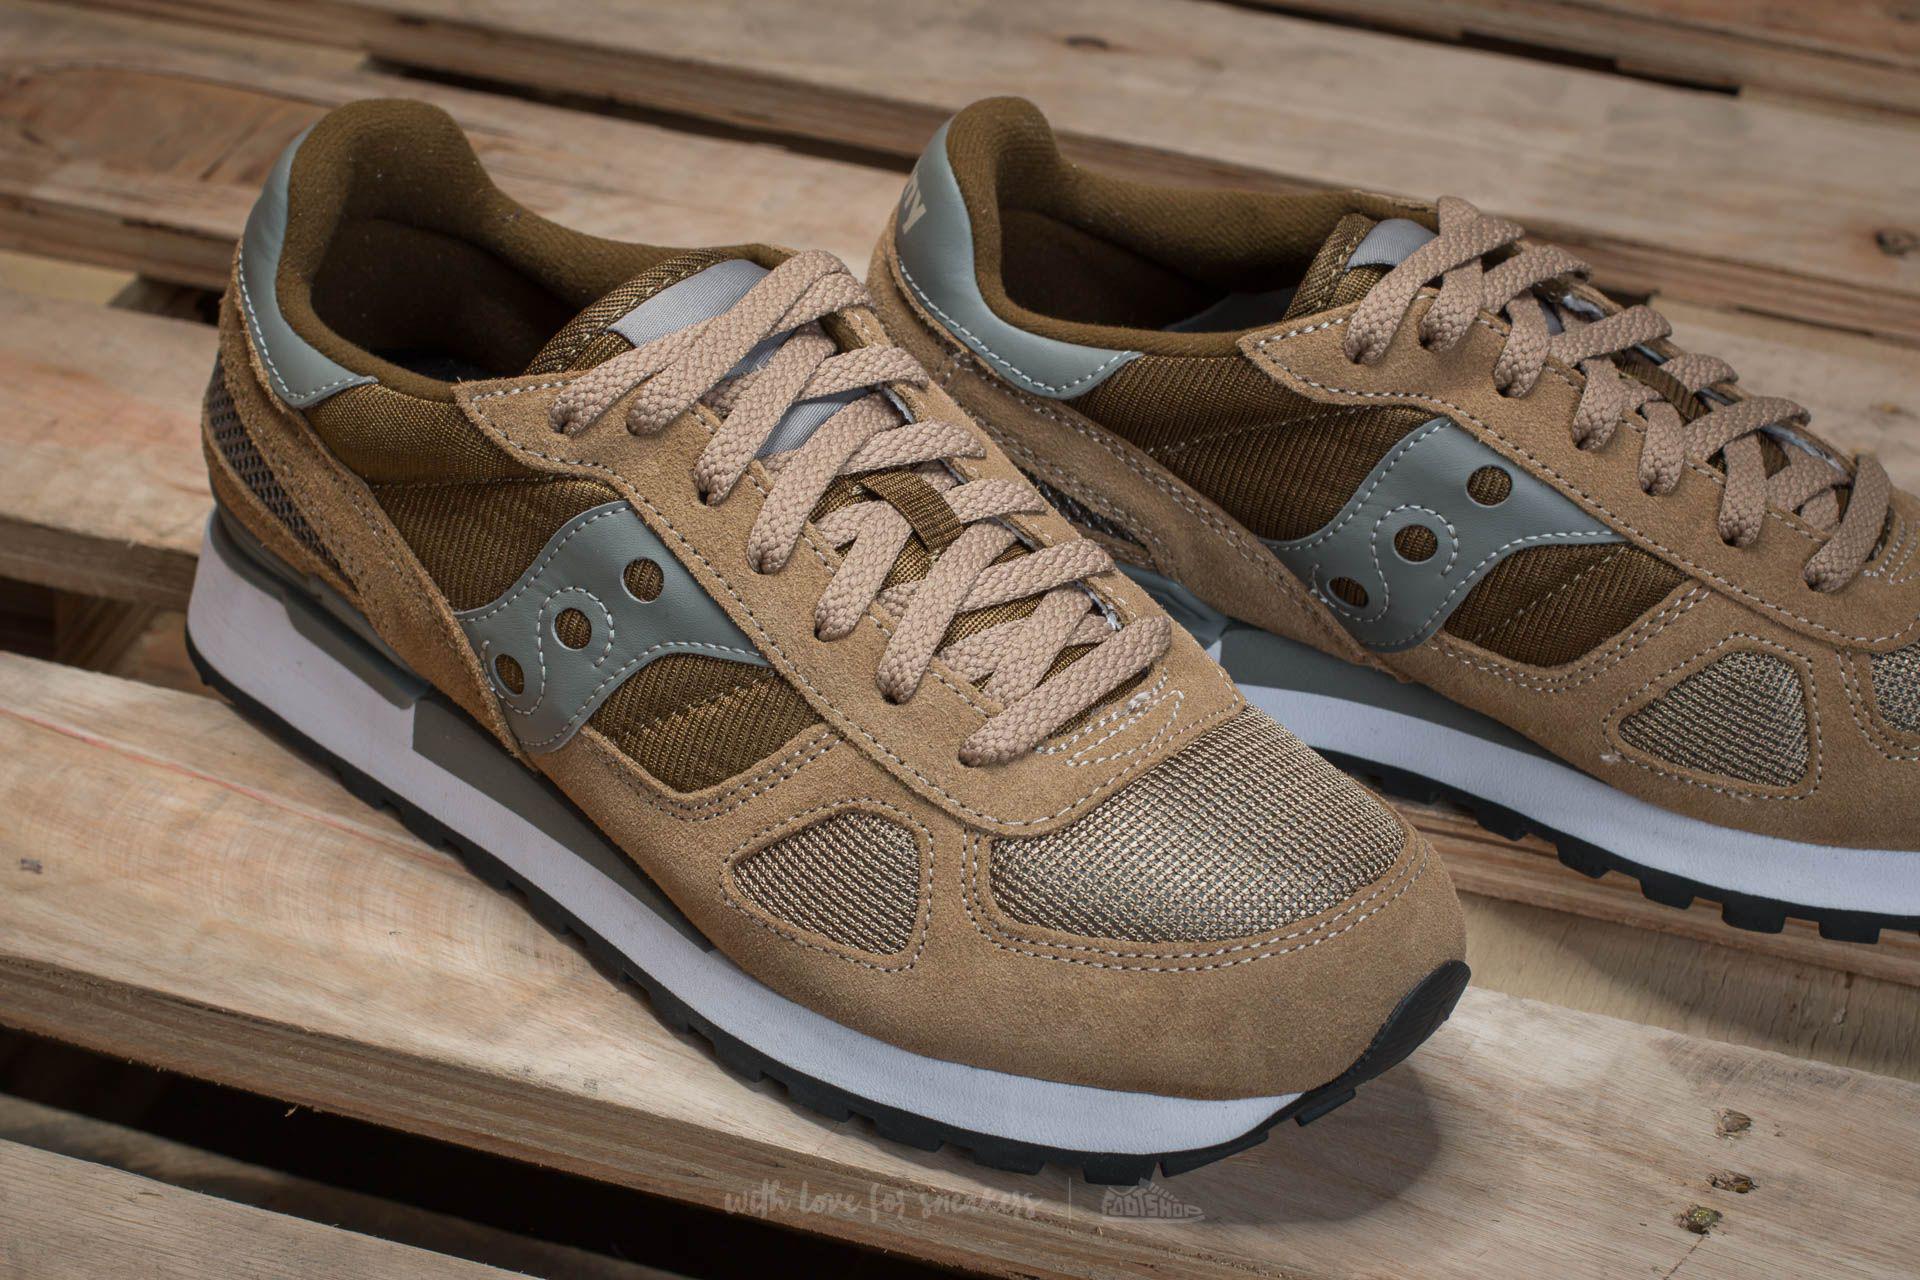 saucony shadow taupe green